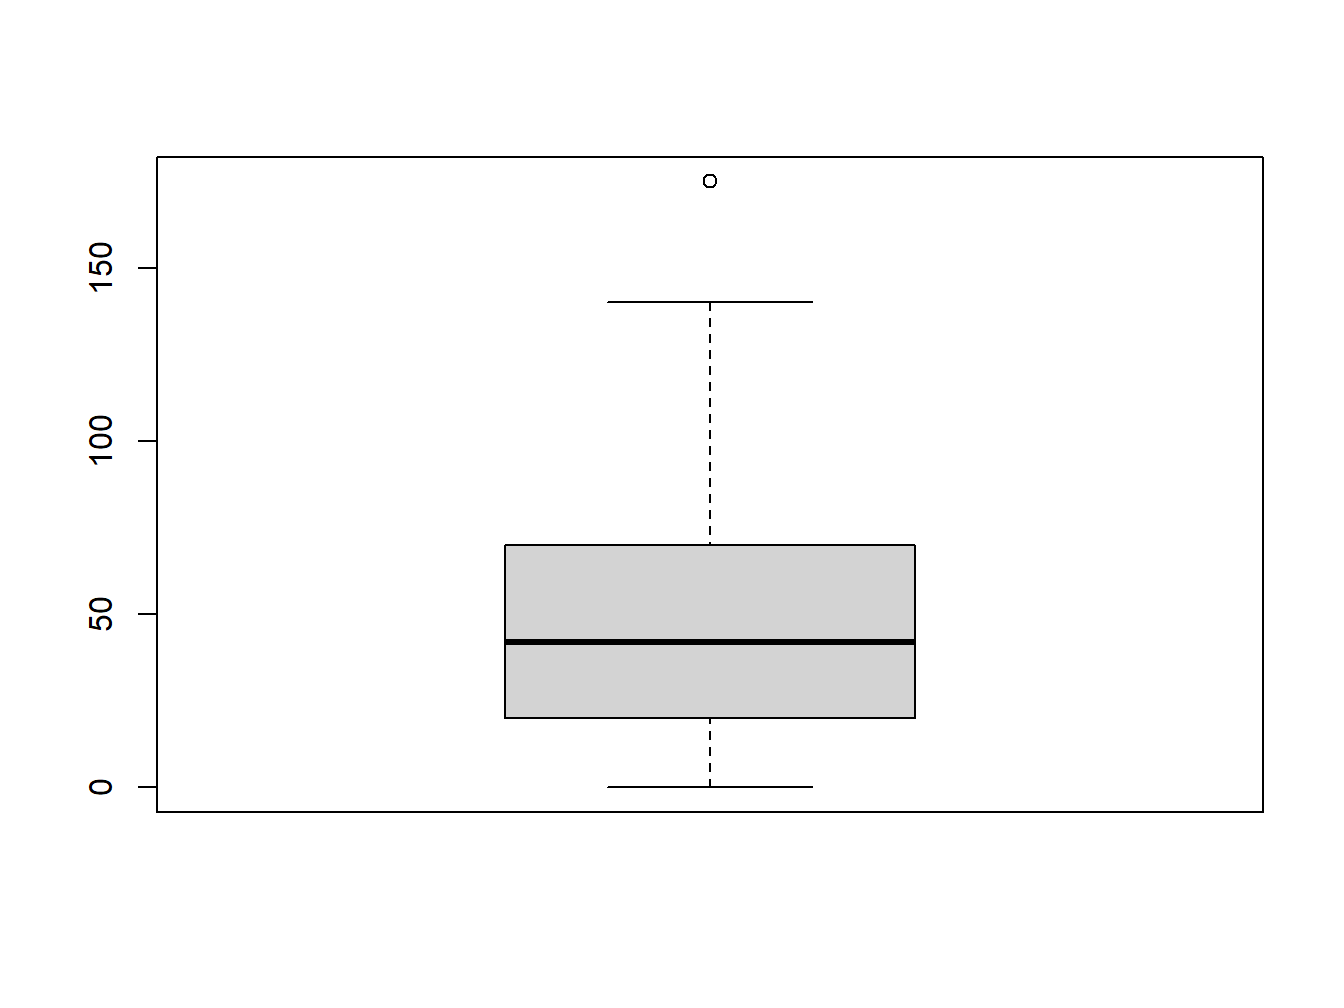 Histogram with a Title